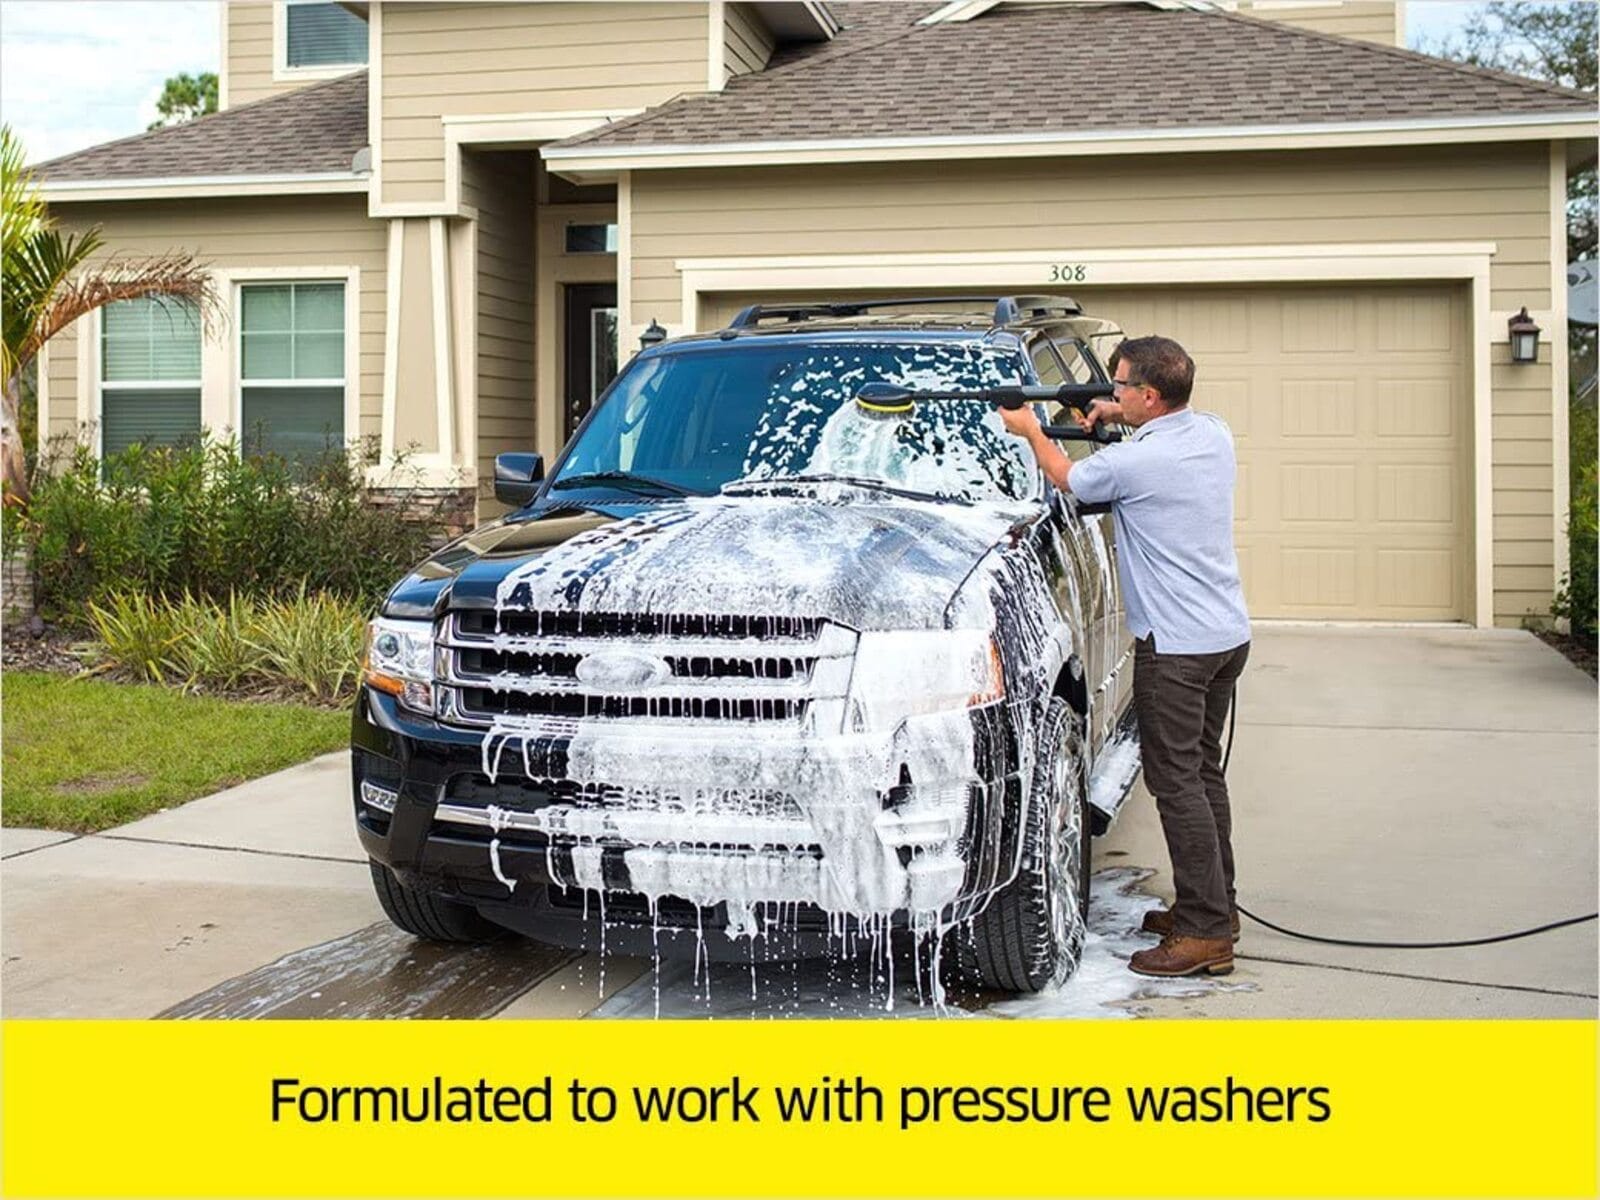 Karcher 128 oz. Vehicle Wash and Wax Pressure Washer Cleaner in the Pressure  Washer Cleaning Solutions department at